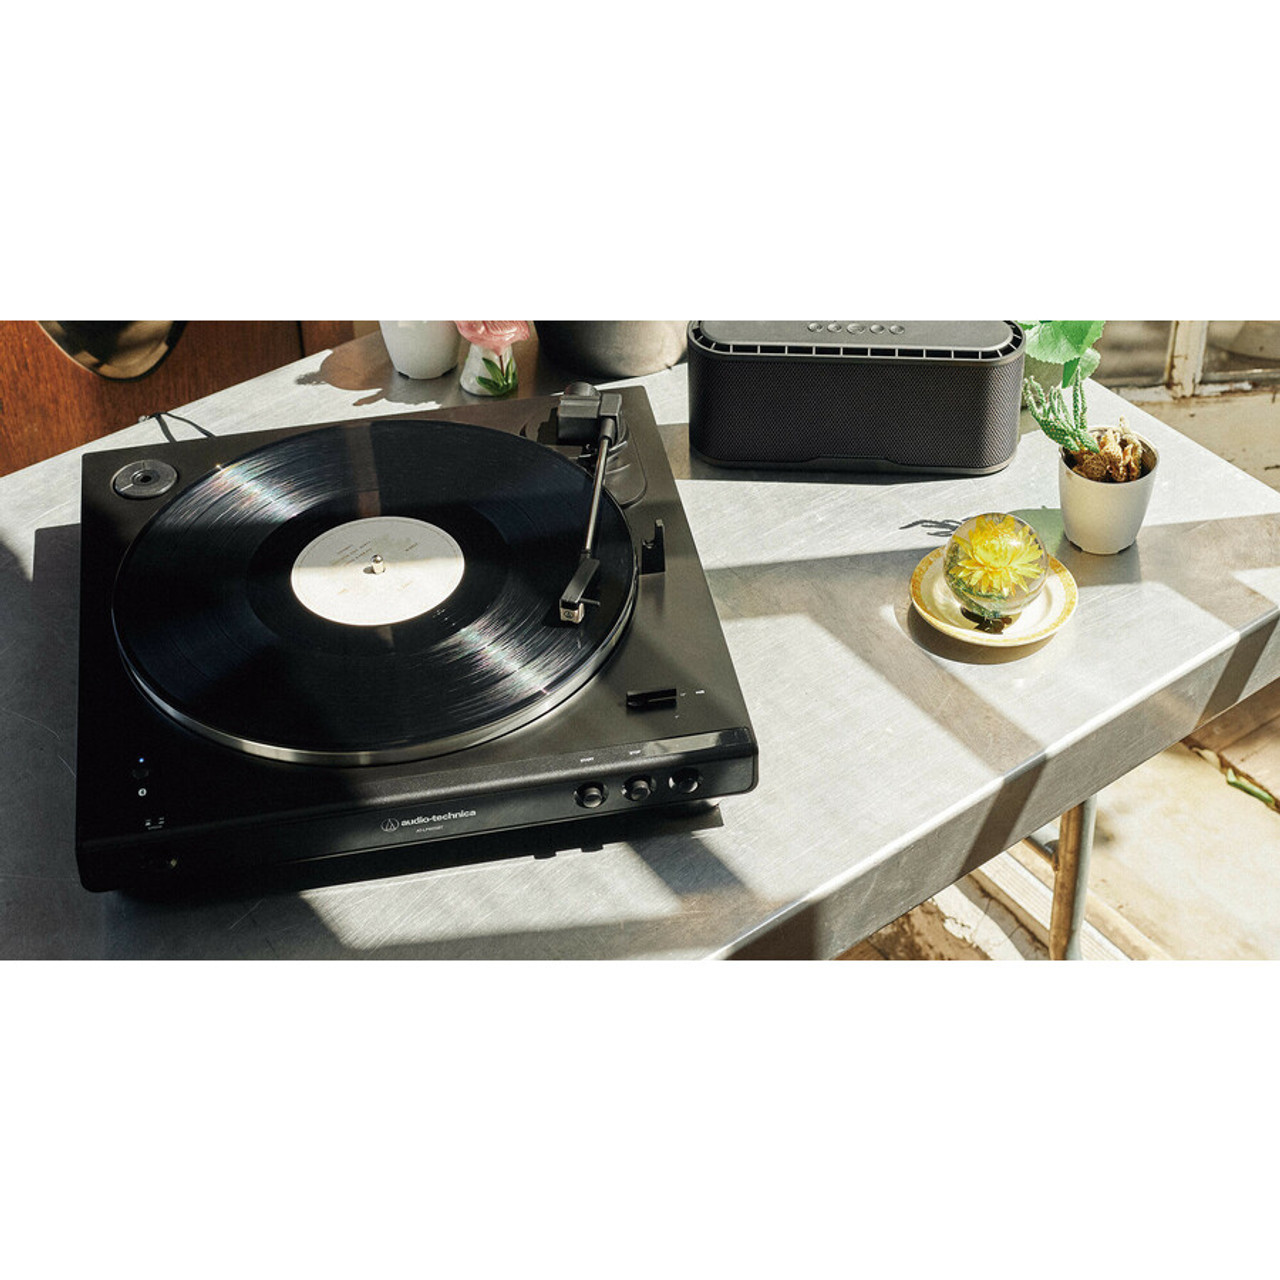 Fully Automatic Belt-Drive Stereo Turntable, AT-LP60X, Audio-Technica